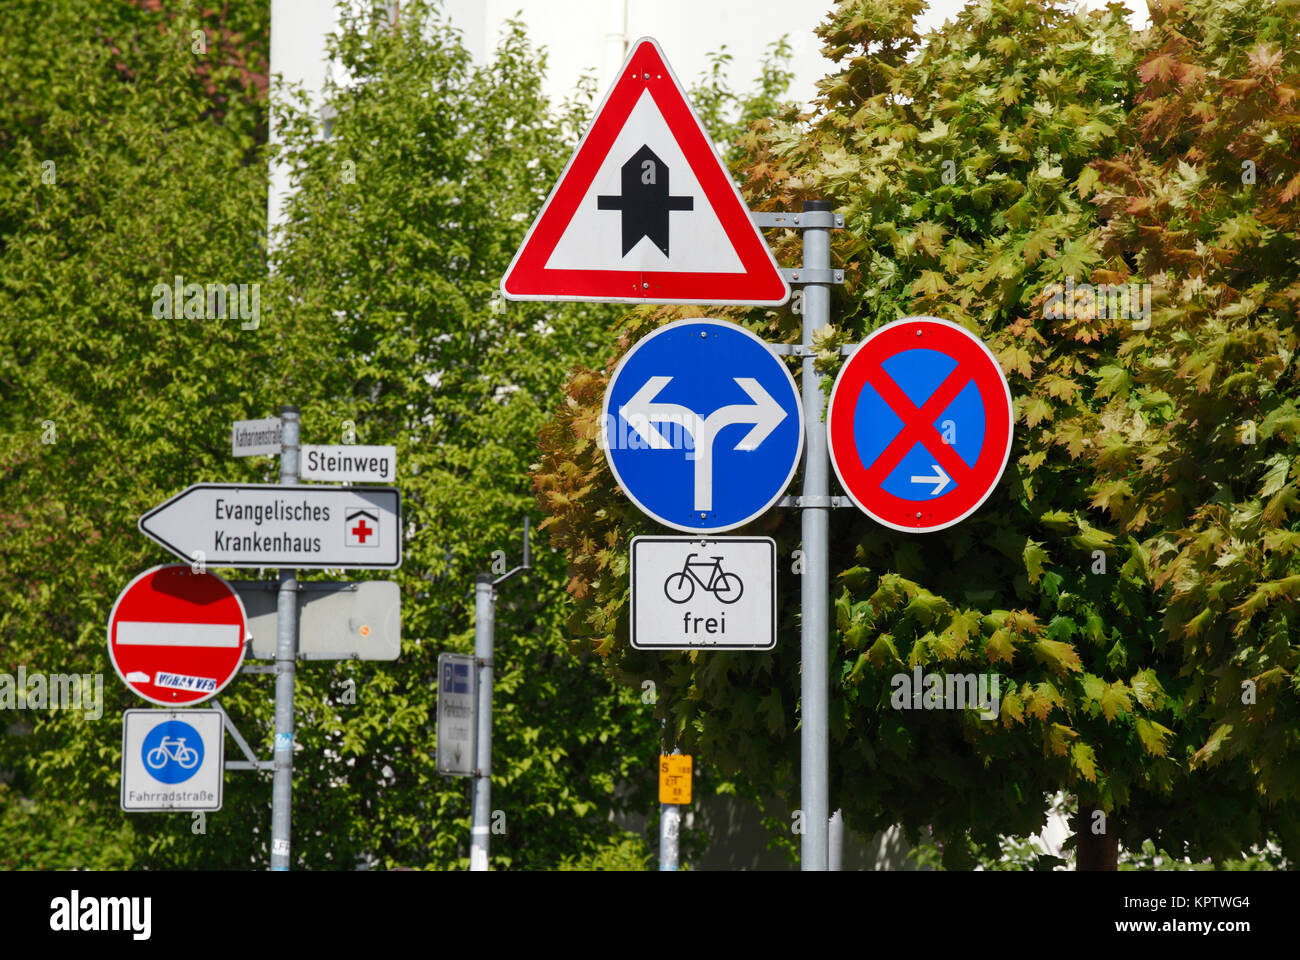 Signposting forest, many different traffic signs in a residential area, Oldenburg in Oldenburg, Lower Saxony, Germany Stock Photo